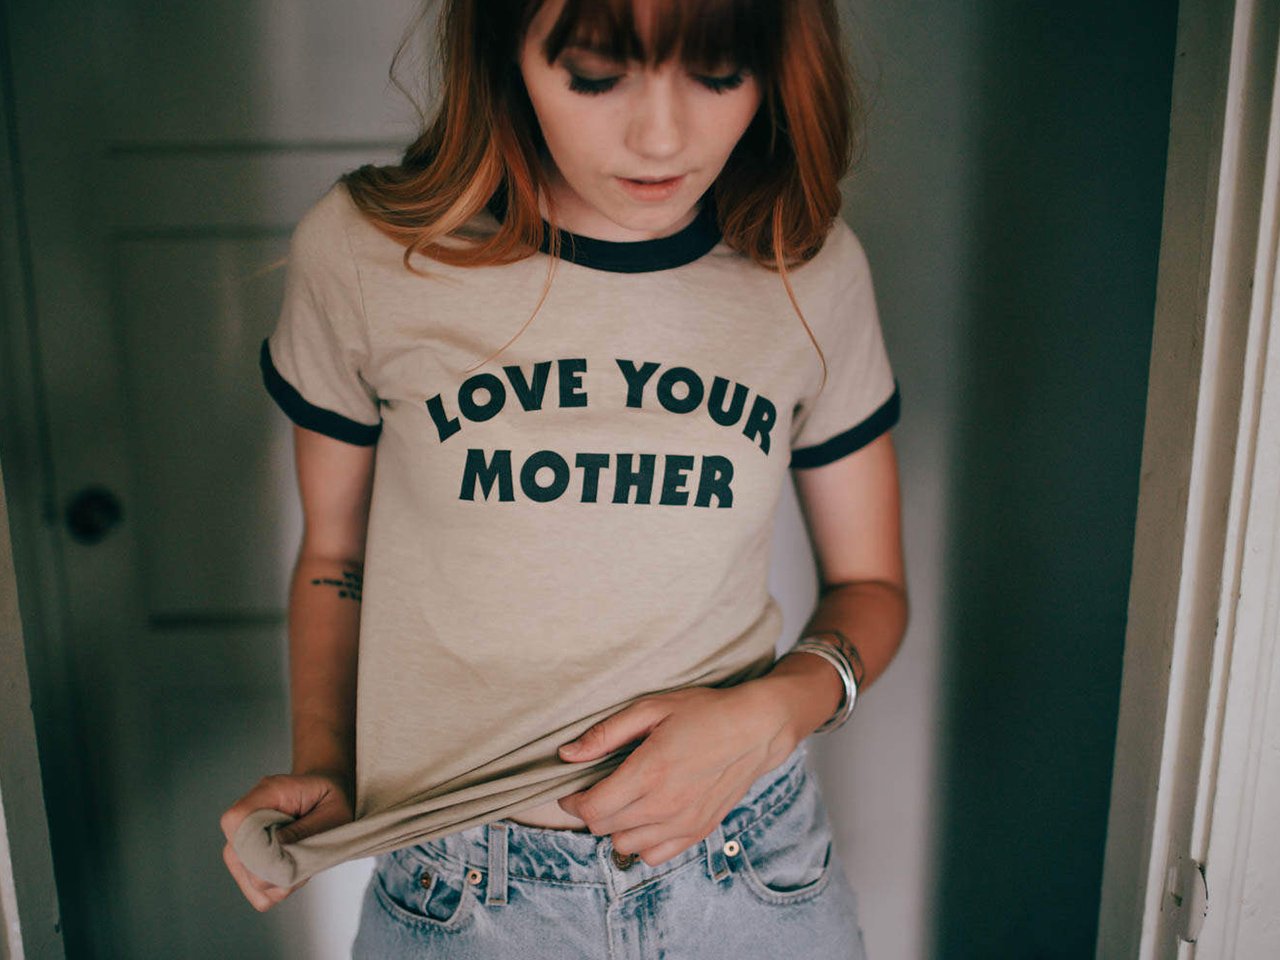 1. Love your mother